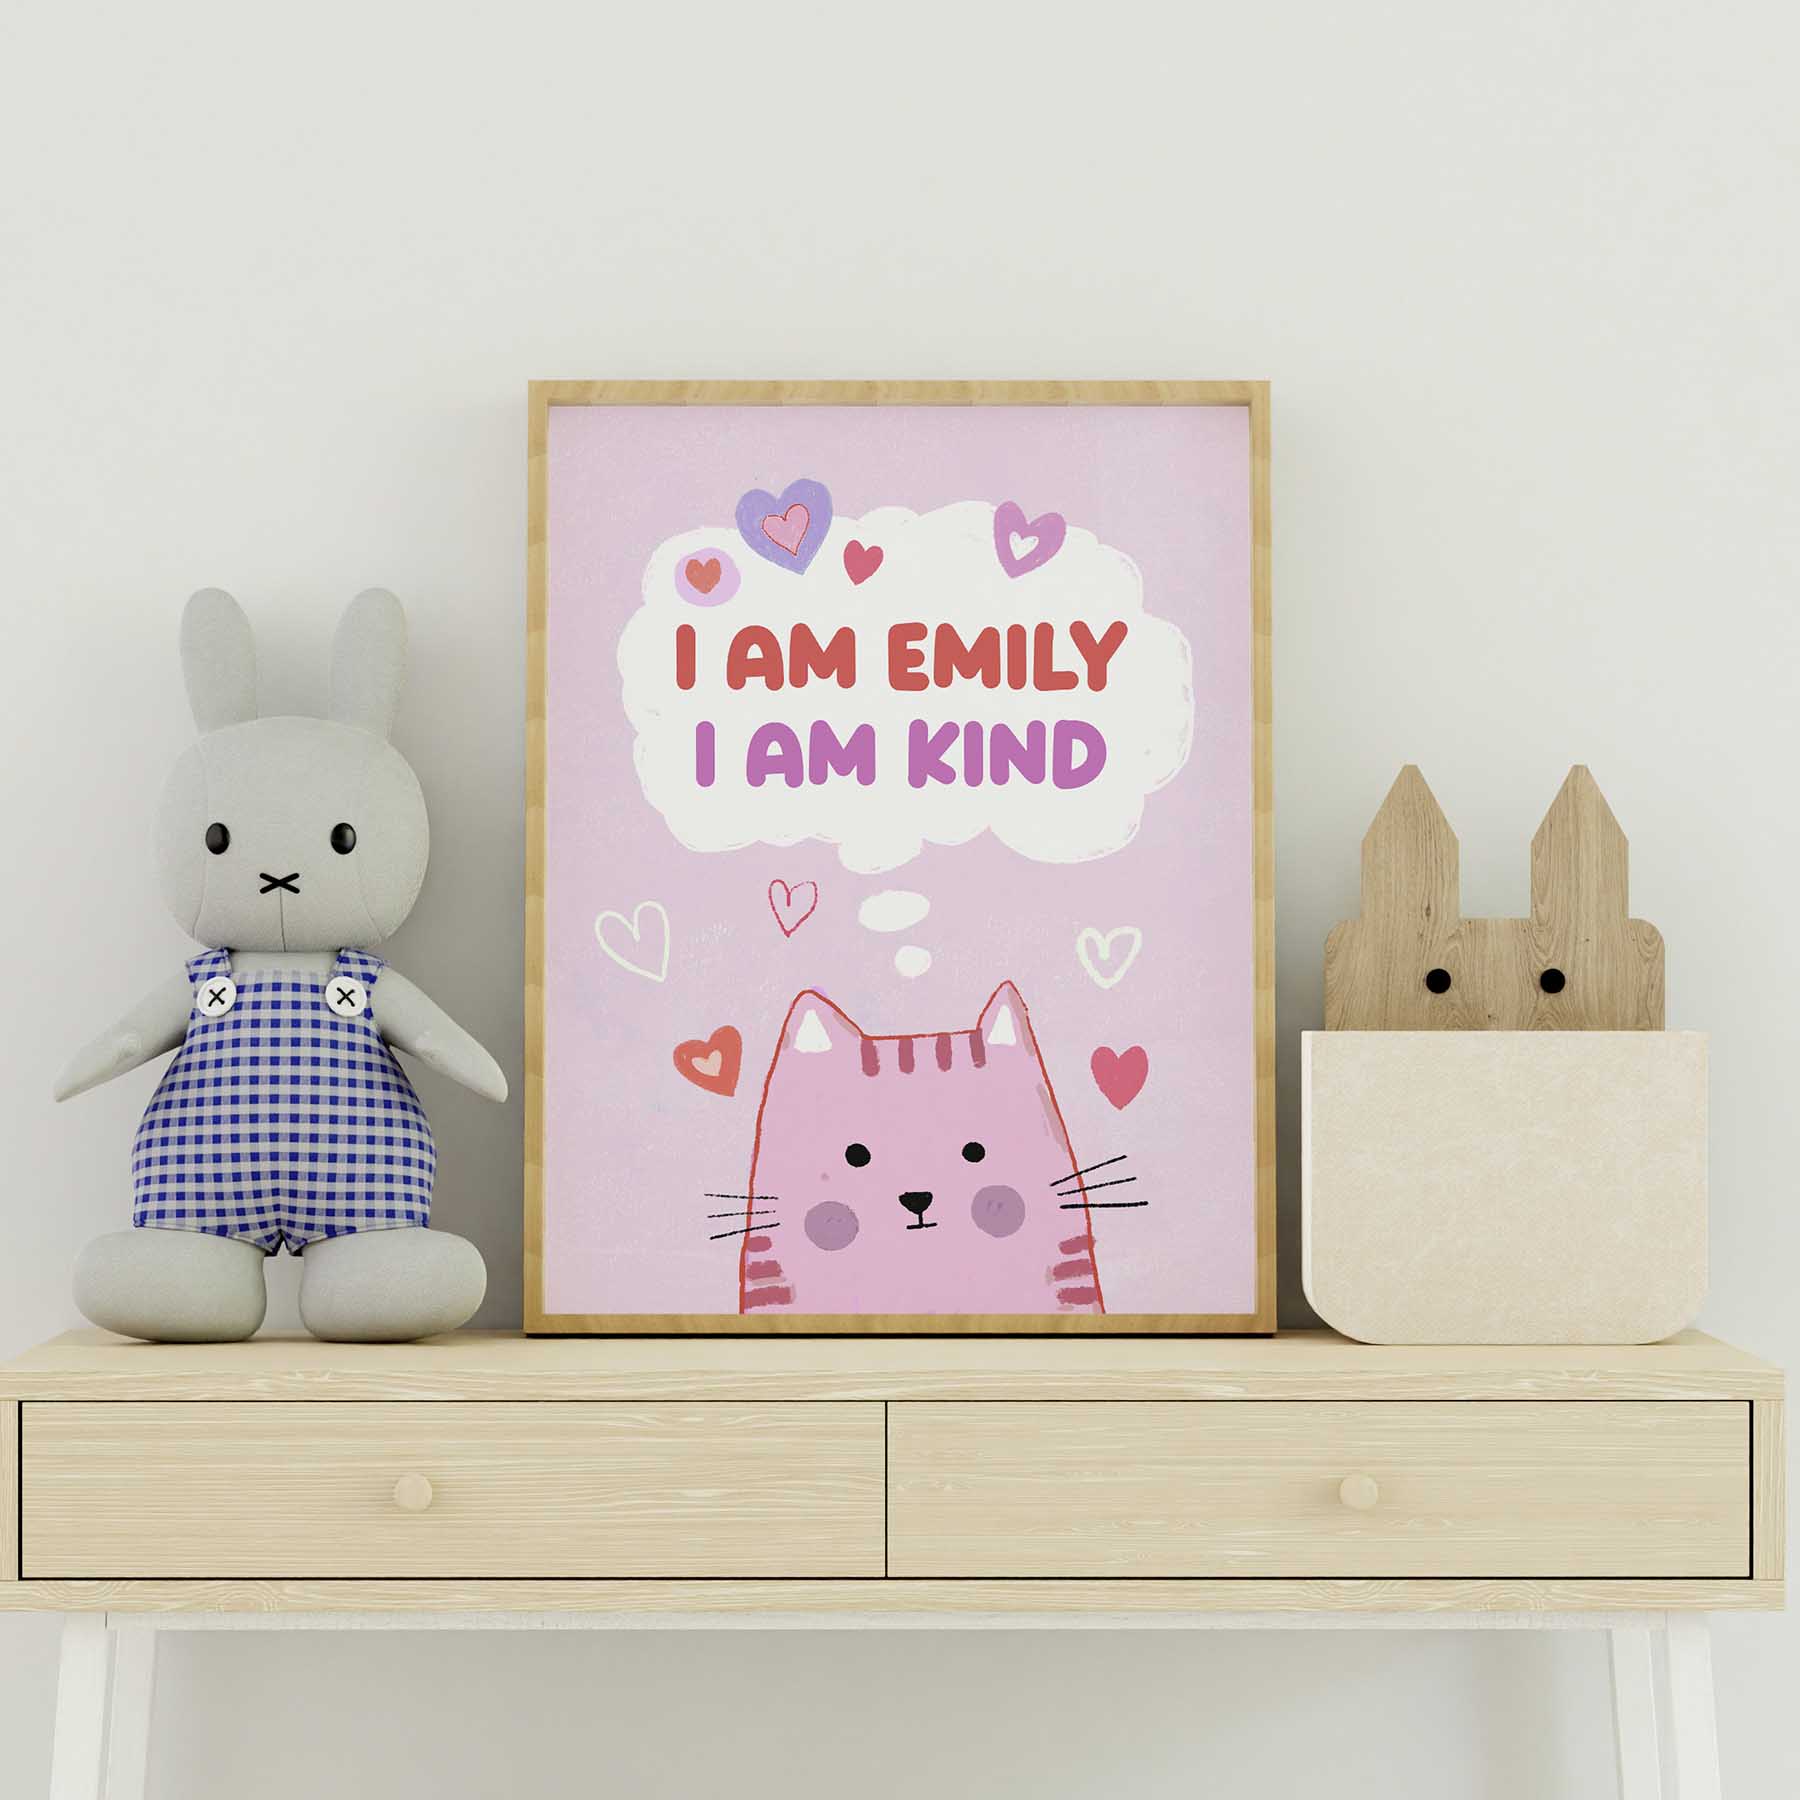 "Playful kitten poster in a frame, coupled with empowering affirmations for kids' personal growth."